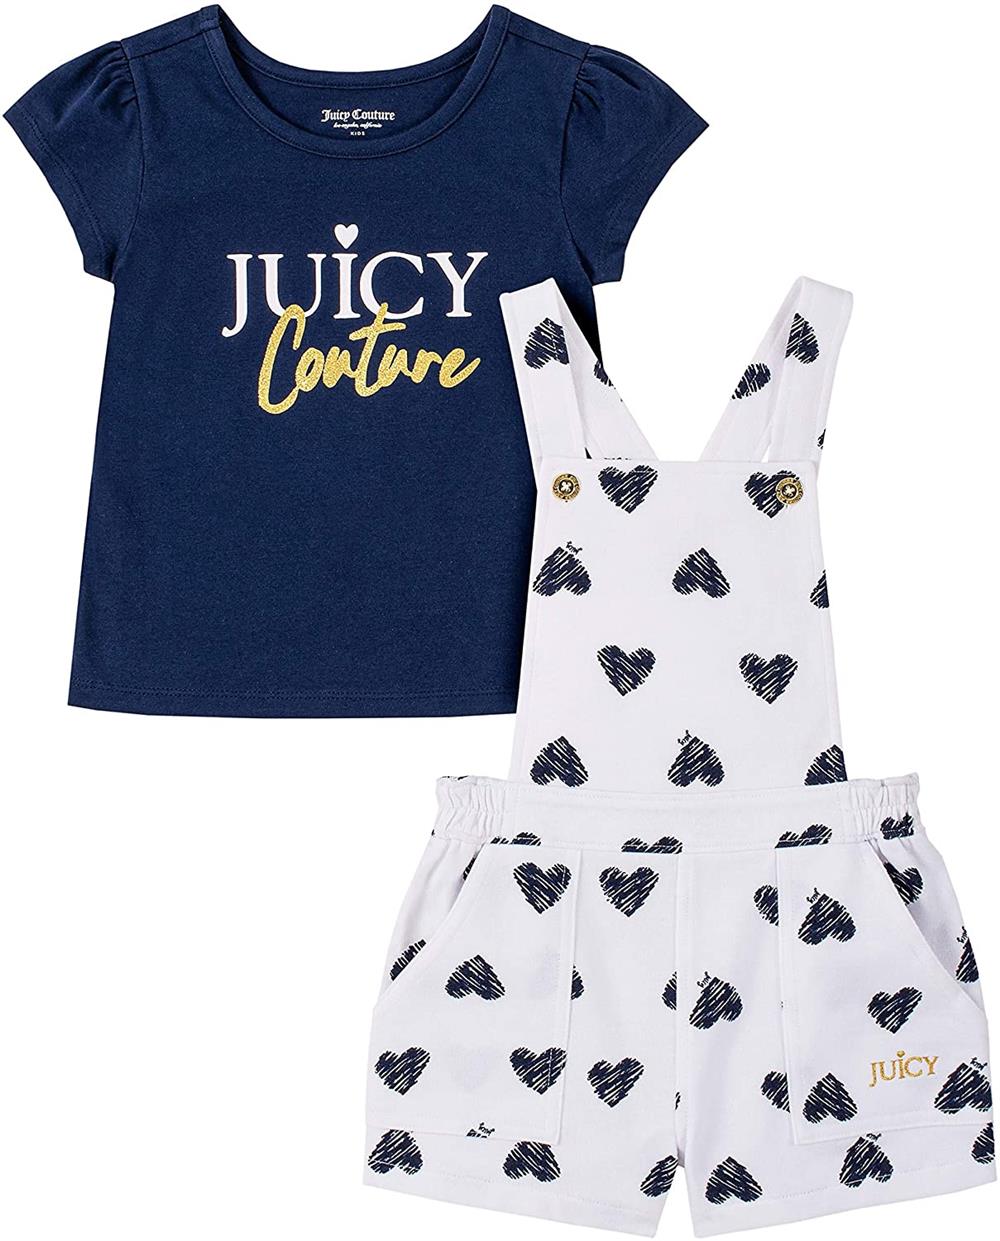 Juicy Couture Girls 2T-4T Heart Shortall Set